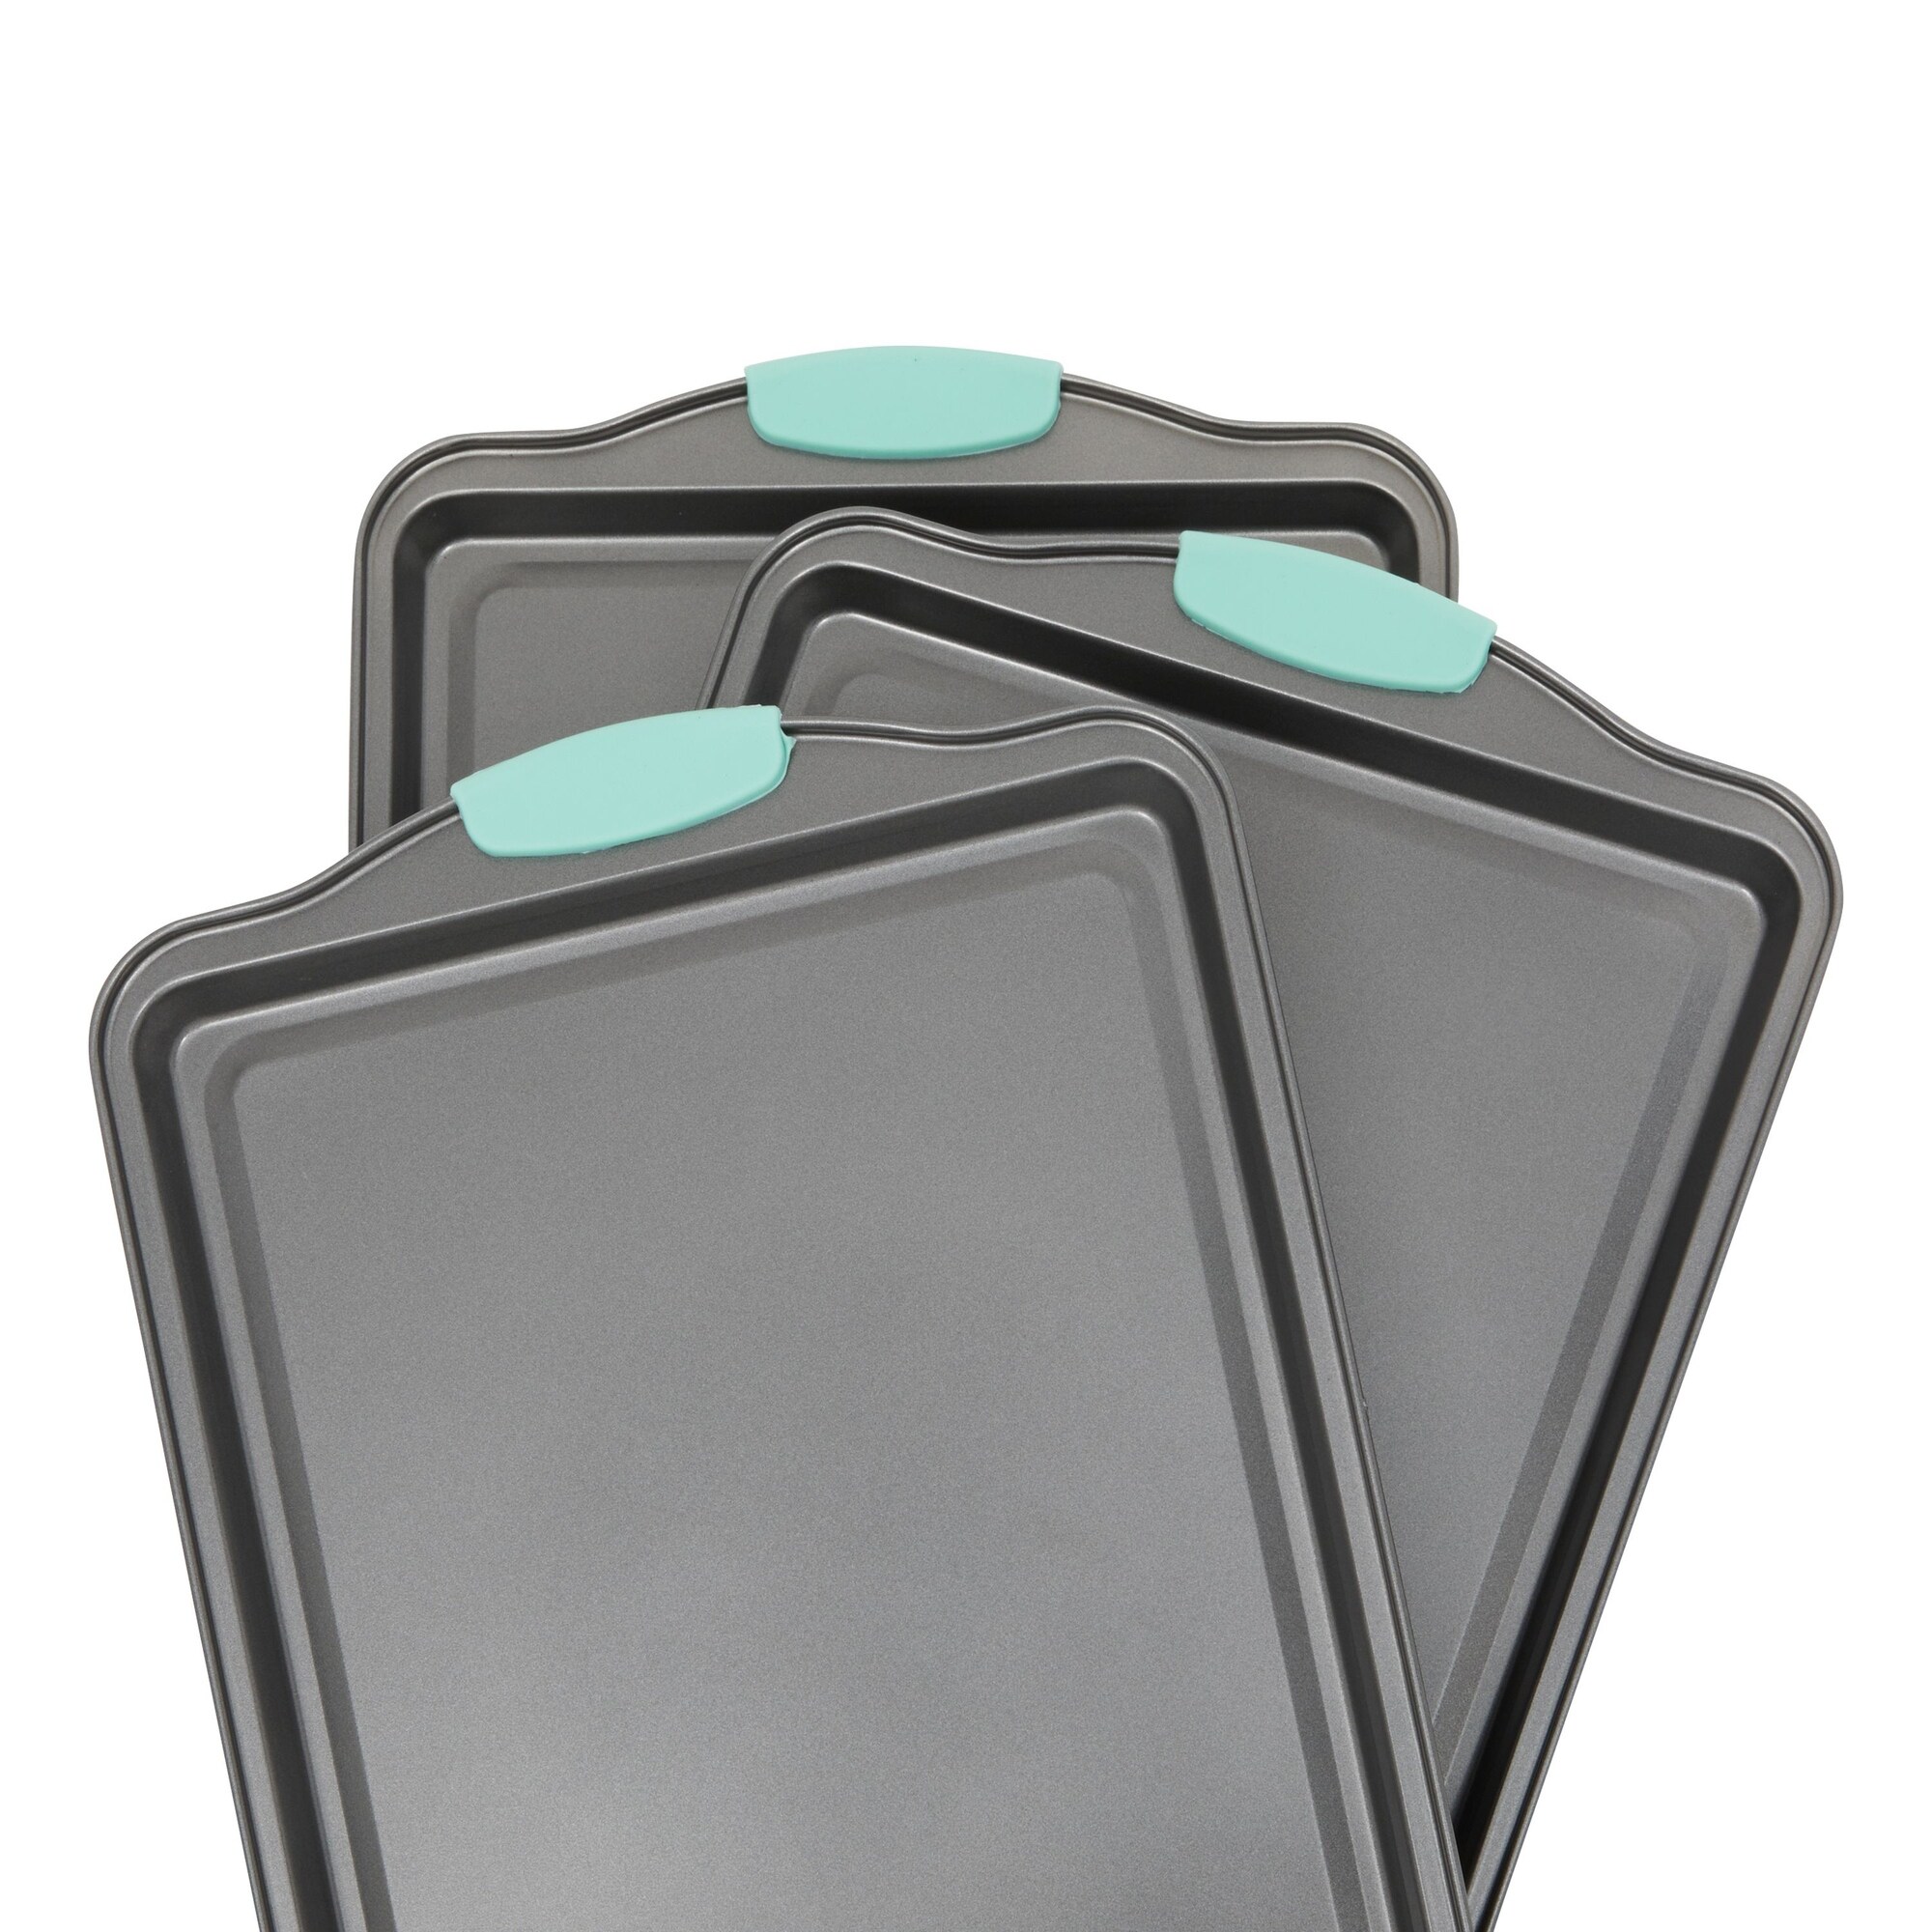 Set of 3 Nonstick Cookie Sheets for Baking, Bakeware Pans with